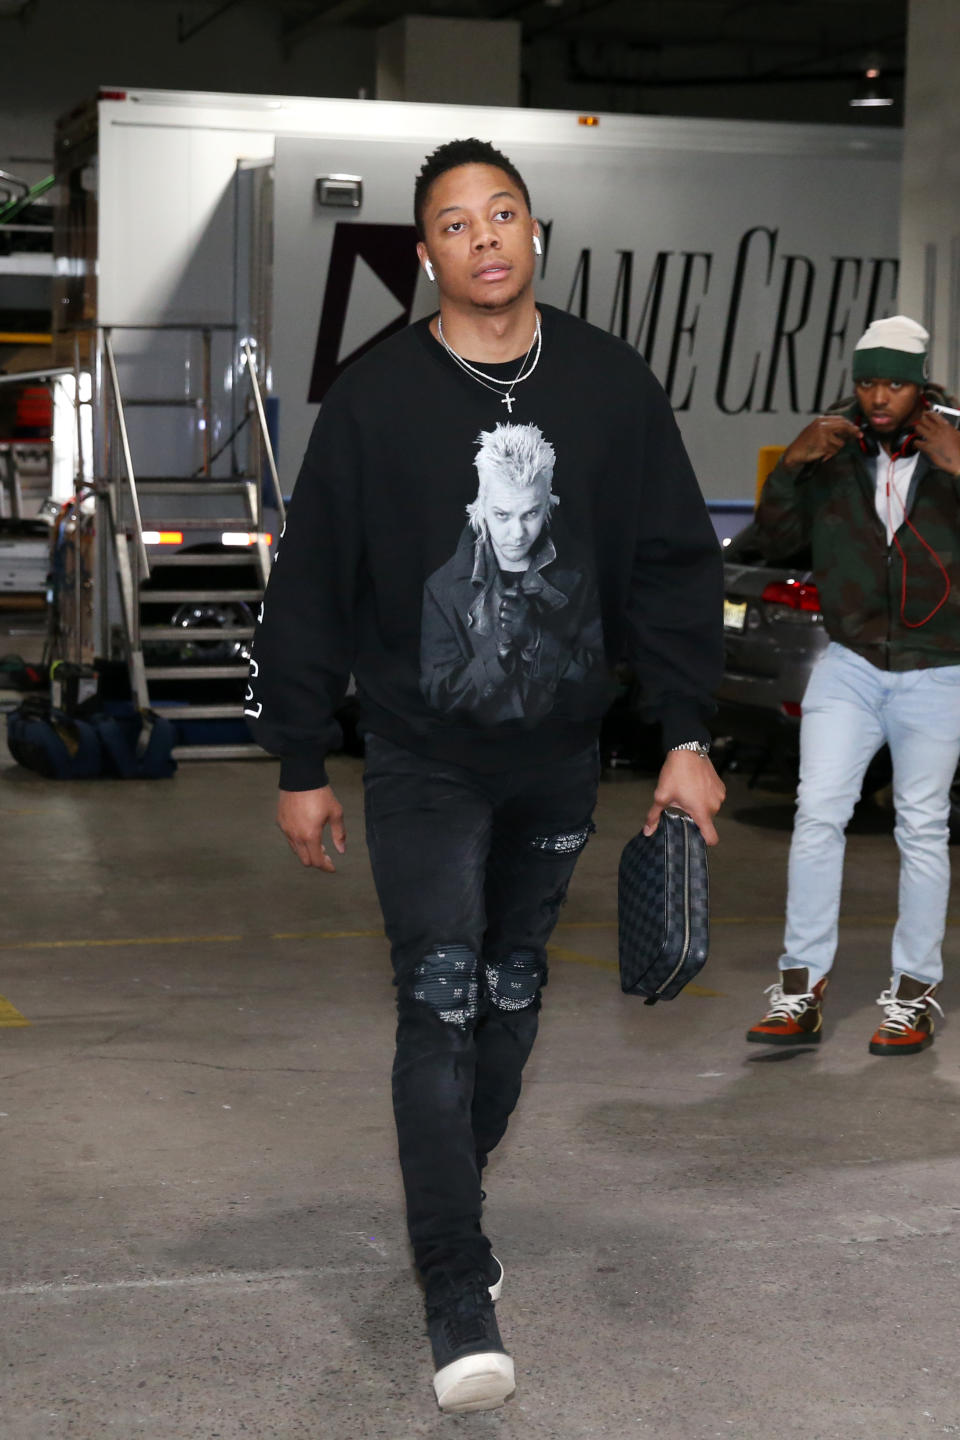 <p>Tim Frazier wears a “Lost Boys” sweater ahead of the Bucks, Nets game at the Barclays Center on April 1. </p>